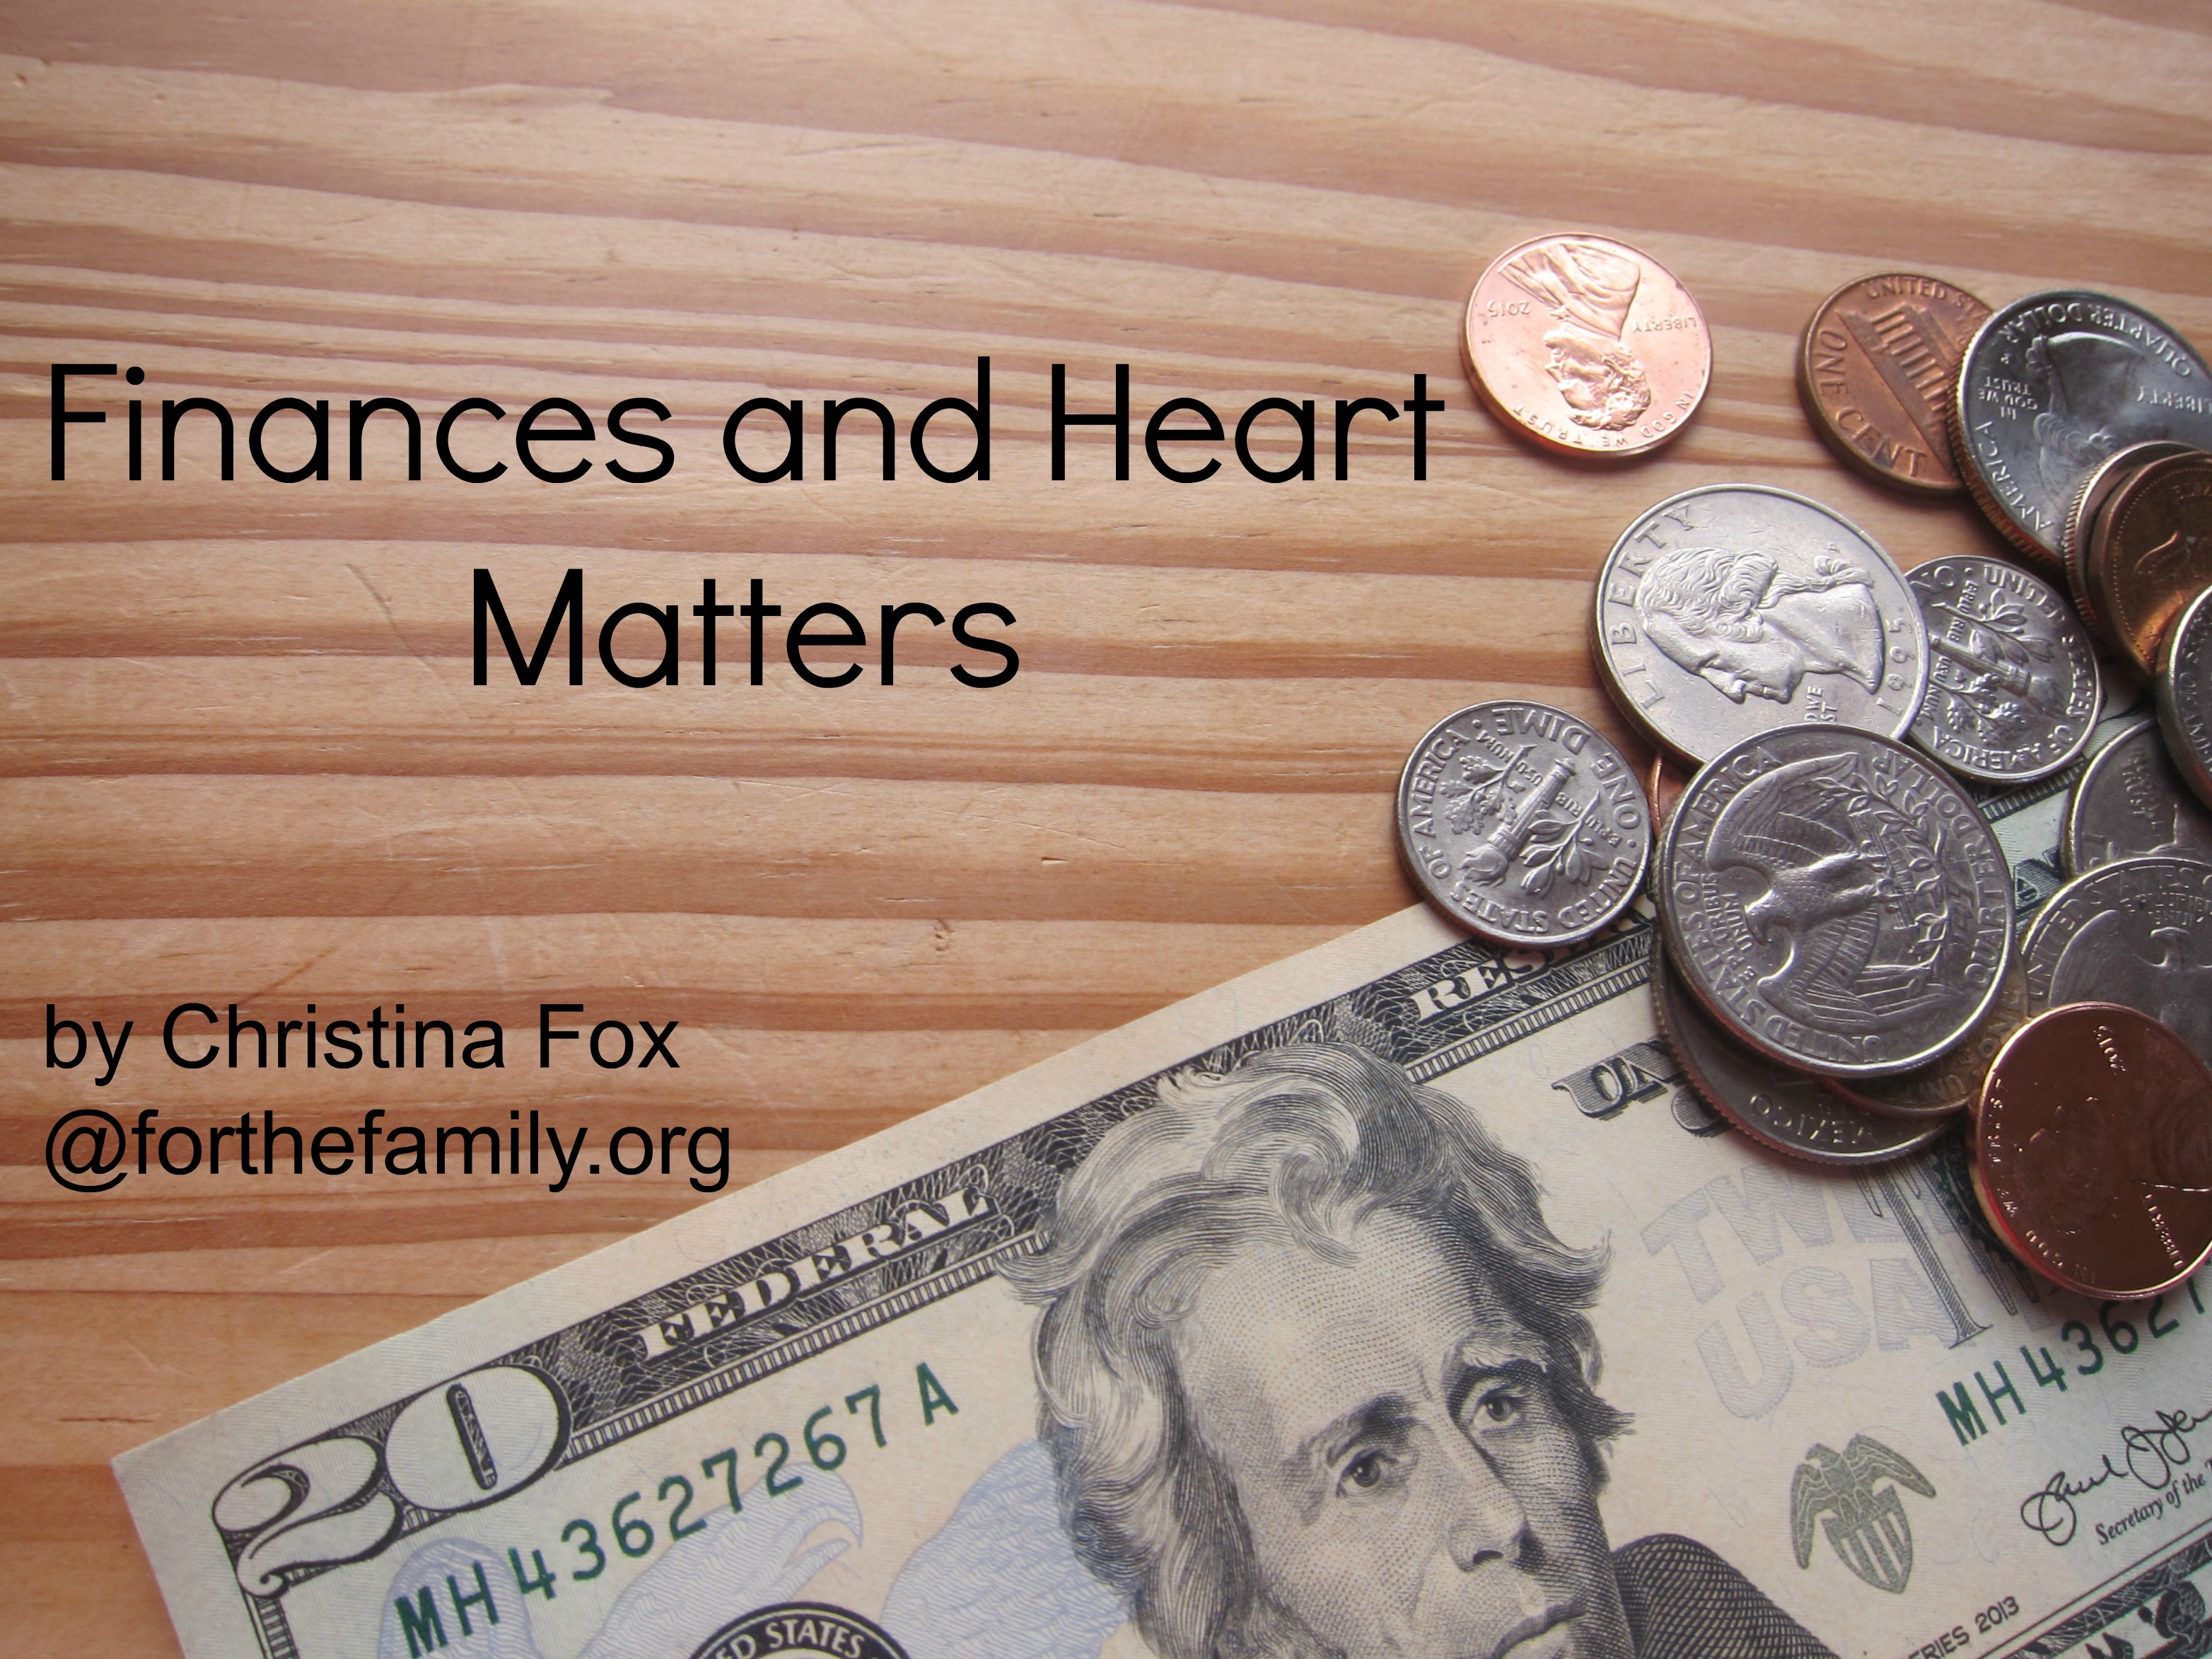 Finances and Heart Matters